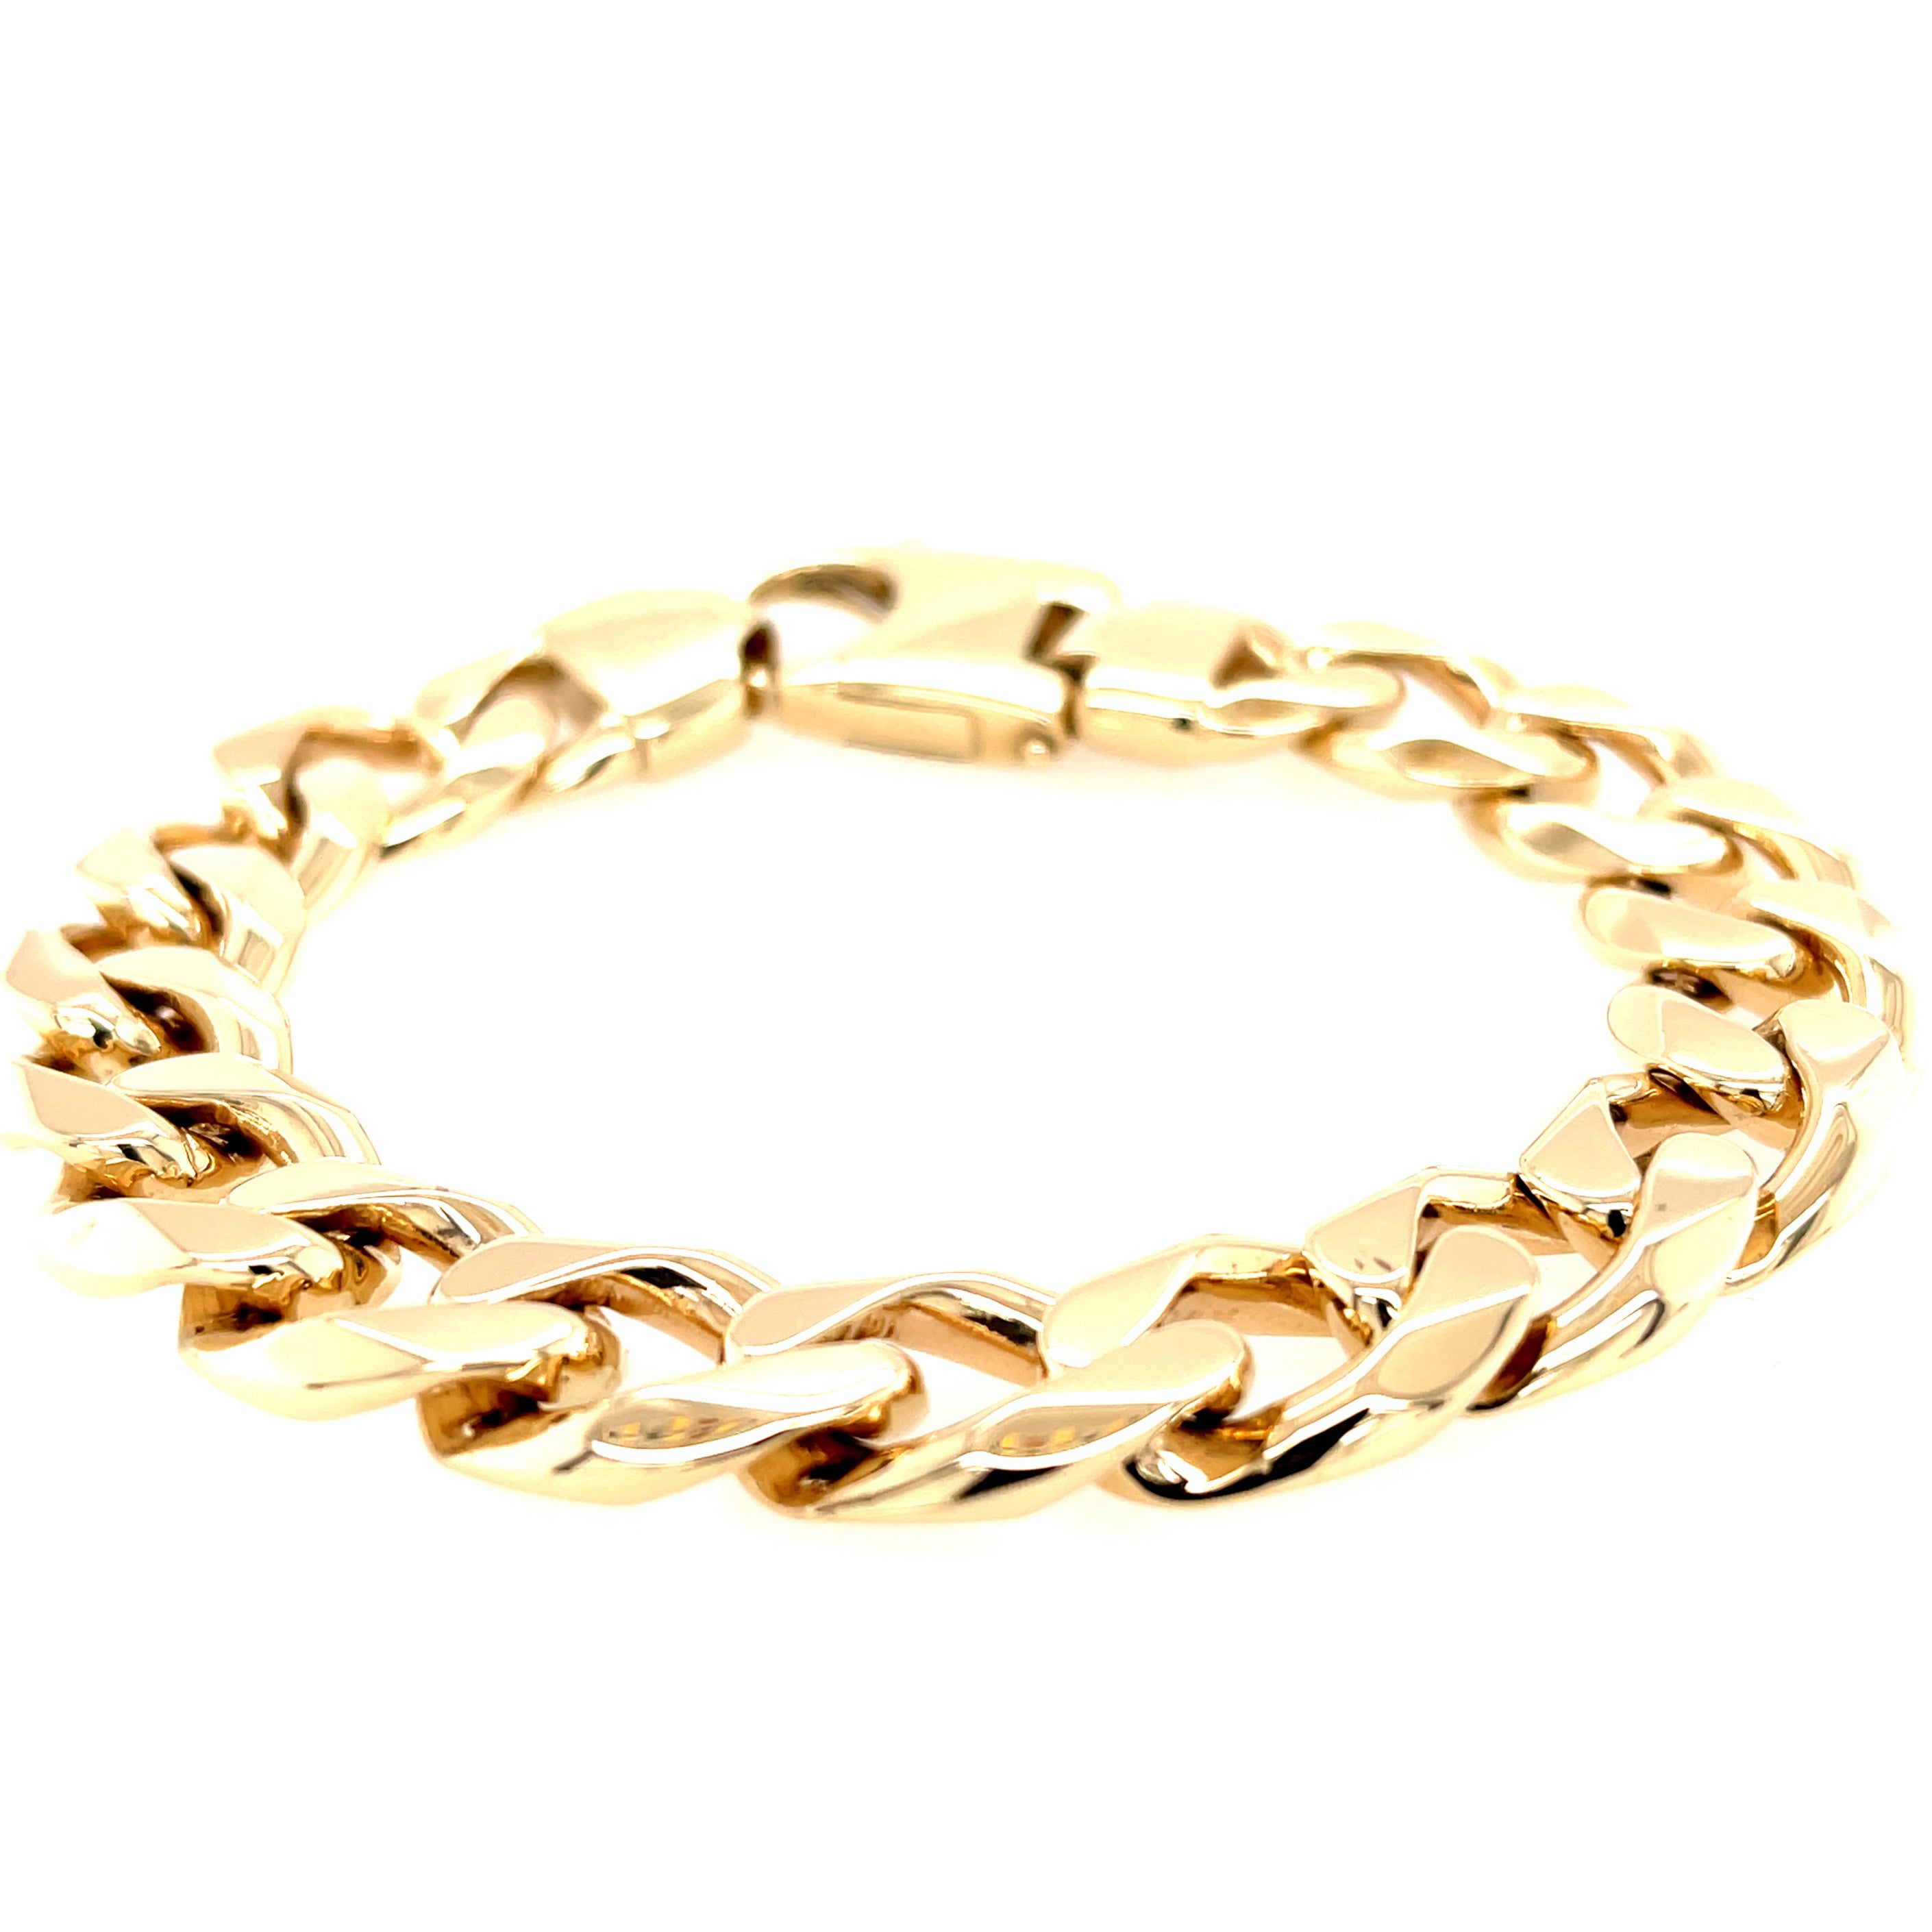 9ct Yellow Gold 9.25" Heavy Curb Link Bracelet - 91.60g